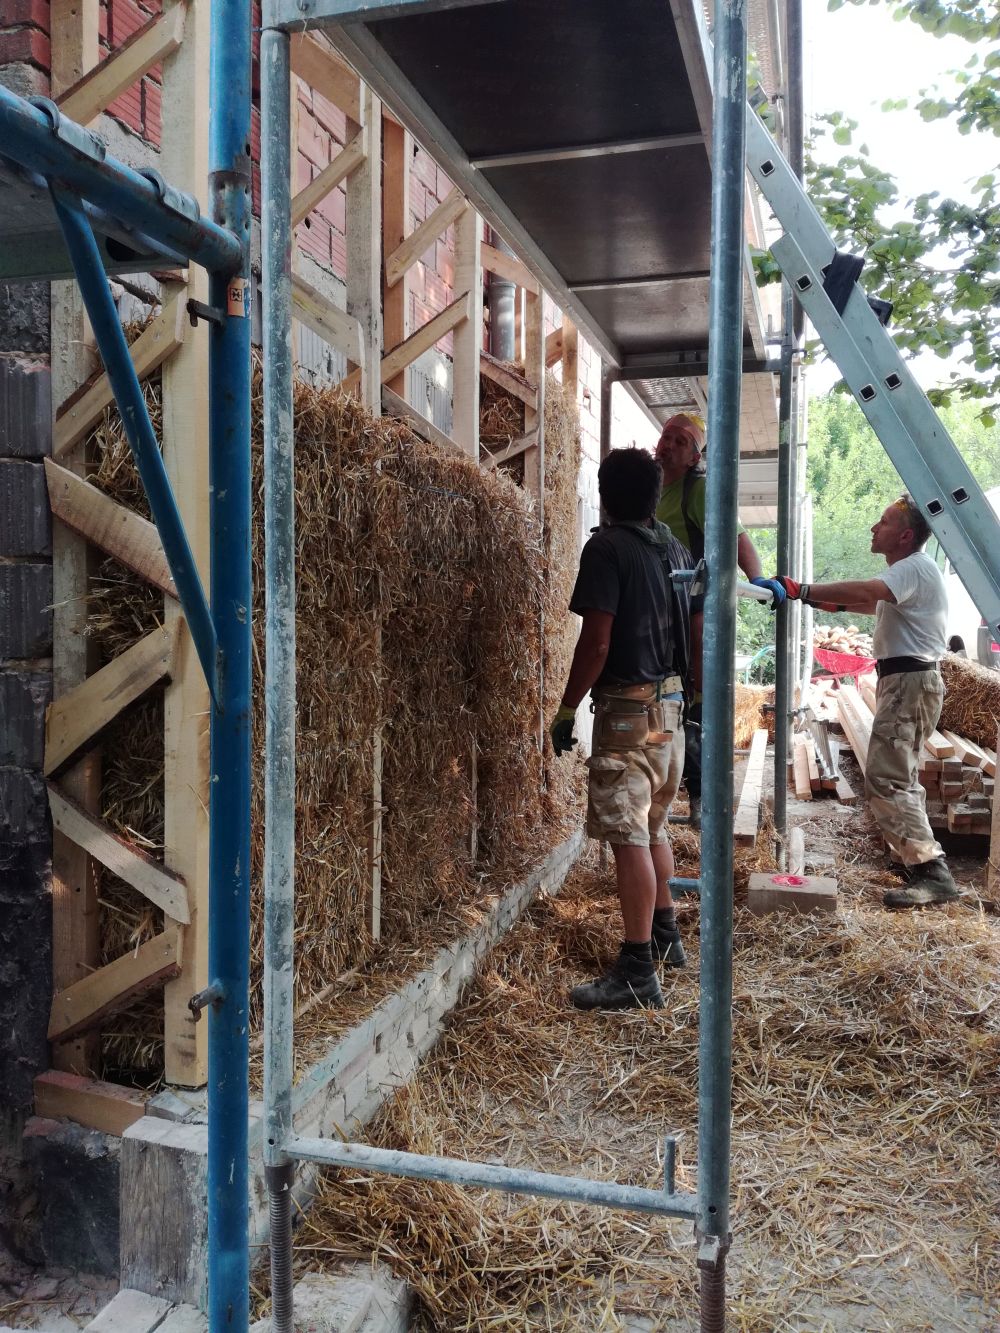 Strawbales to insulate the house